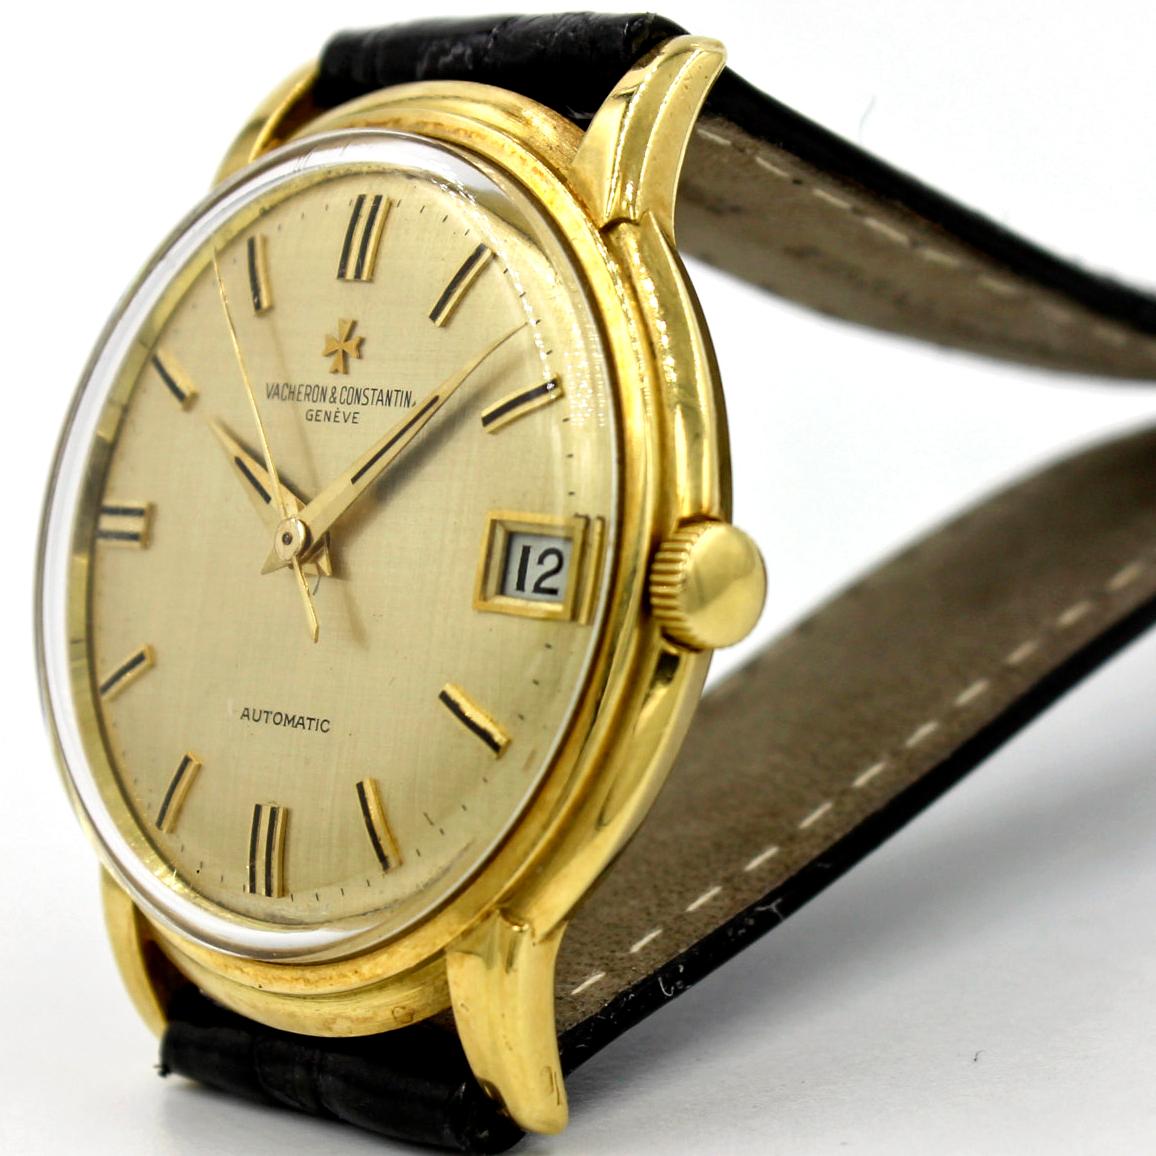 Vintage Vacheron Constantin Quantieme automatic wrist watch for men in 18 karat yellow gold on black leather strap. Circa 1960's. Round case. Acrylic crystal. Gold textured dial with black and gold stick hour markers. Dauphine style hands. Powered